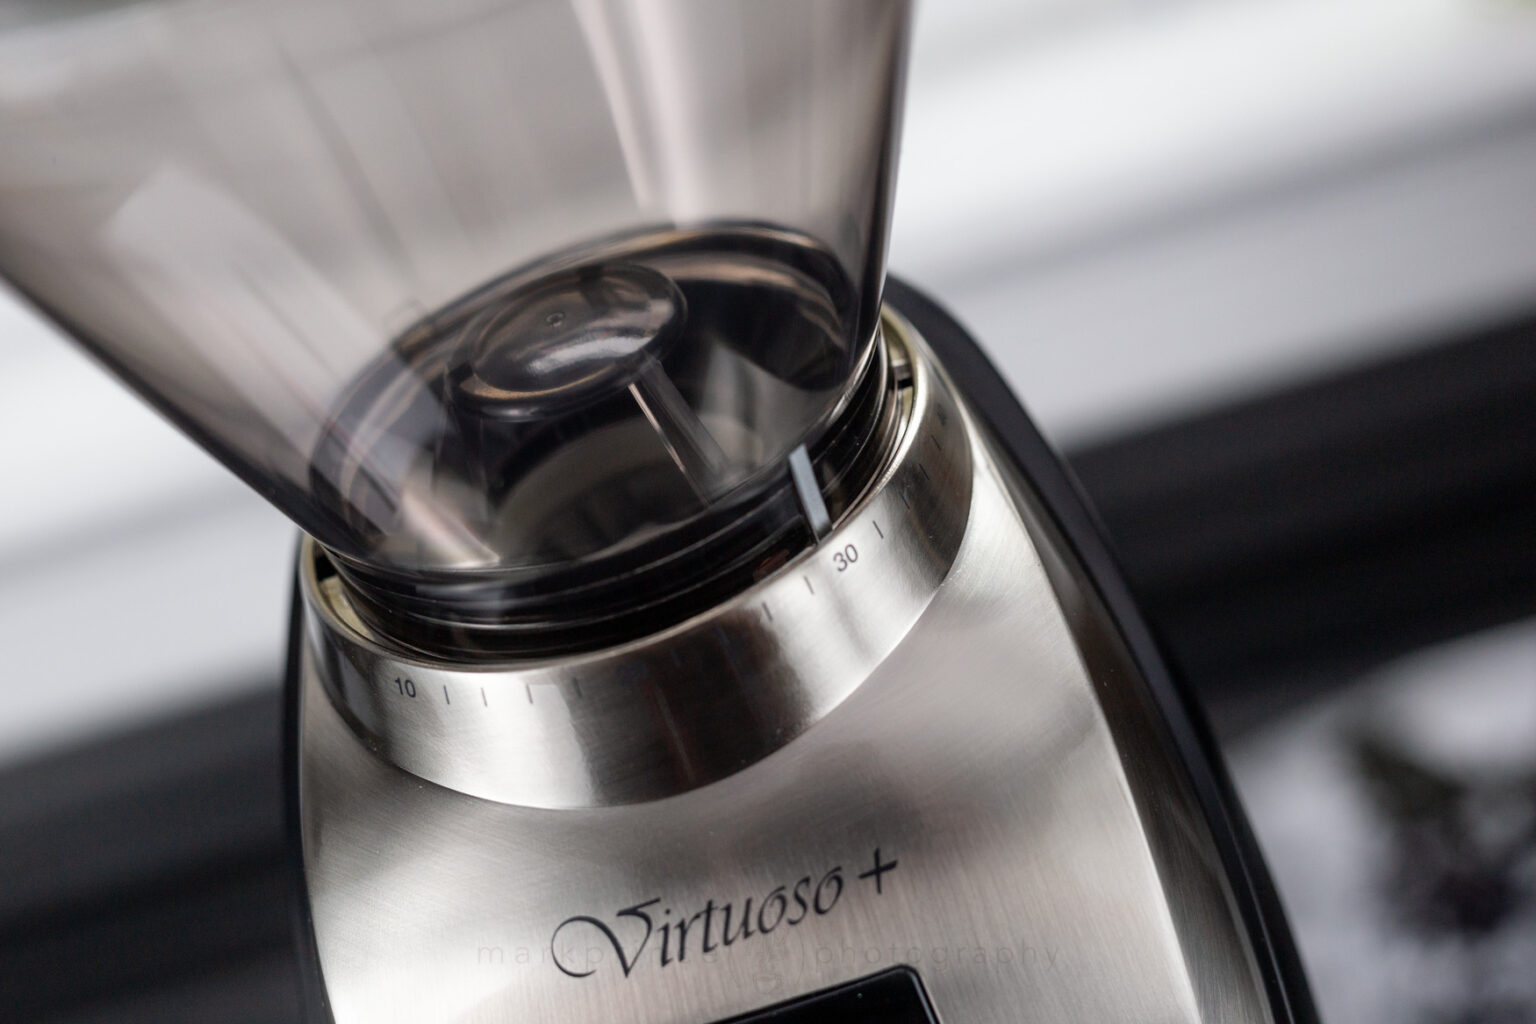 The grind is adjusted finer or coarser via the Virtuoso+'s collar. It has 40 settings.